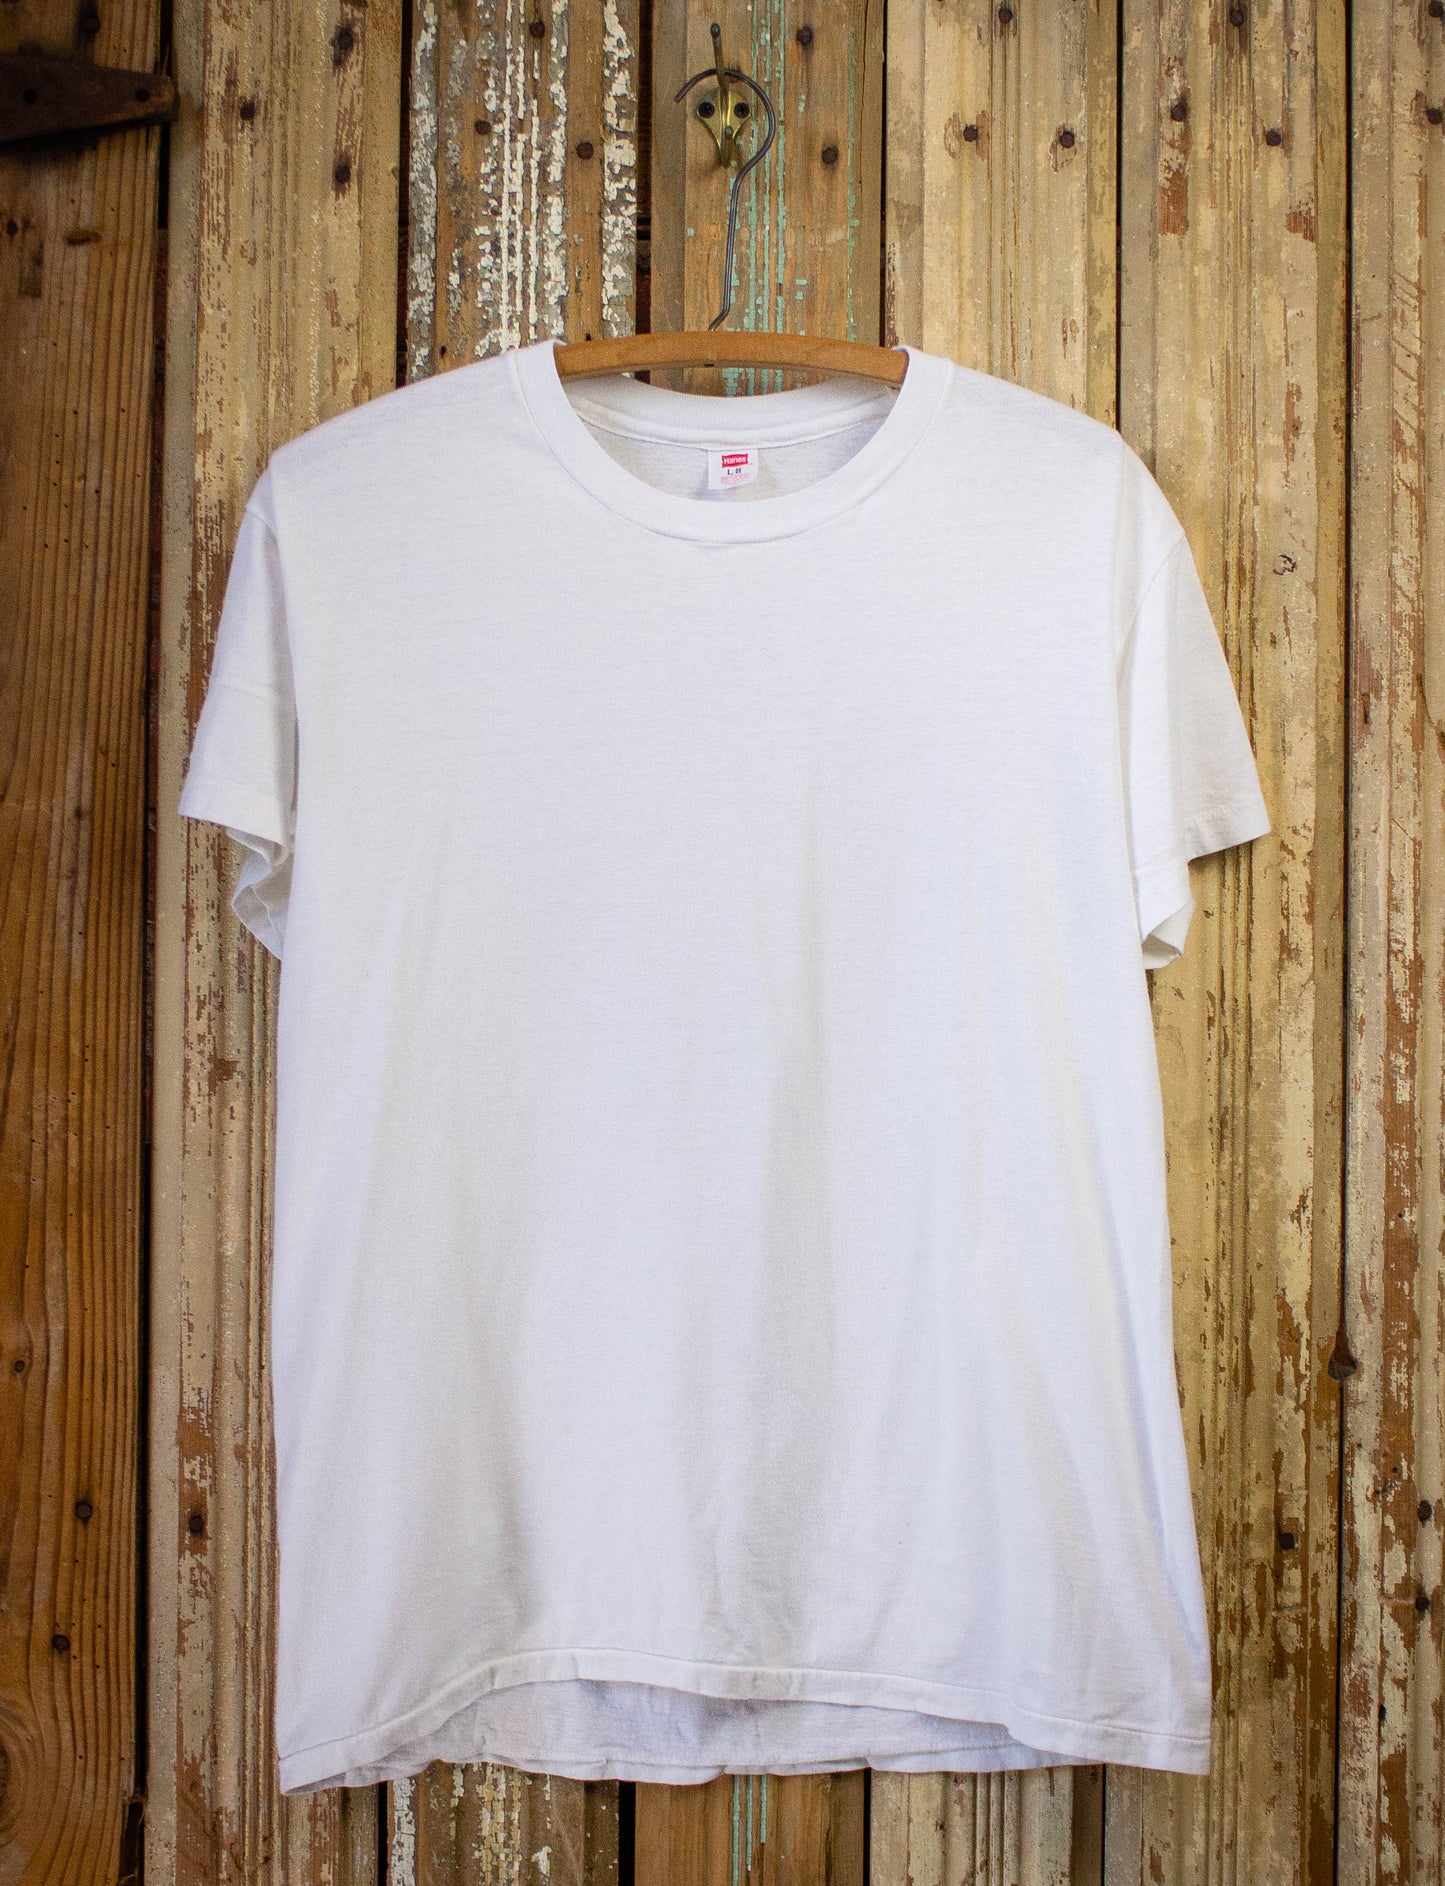 Hanes Classic White Arch Tee - Mincer's of Charlottesville